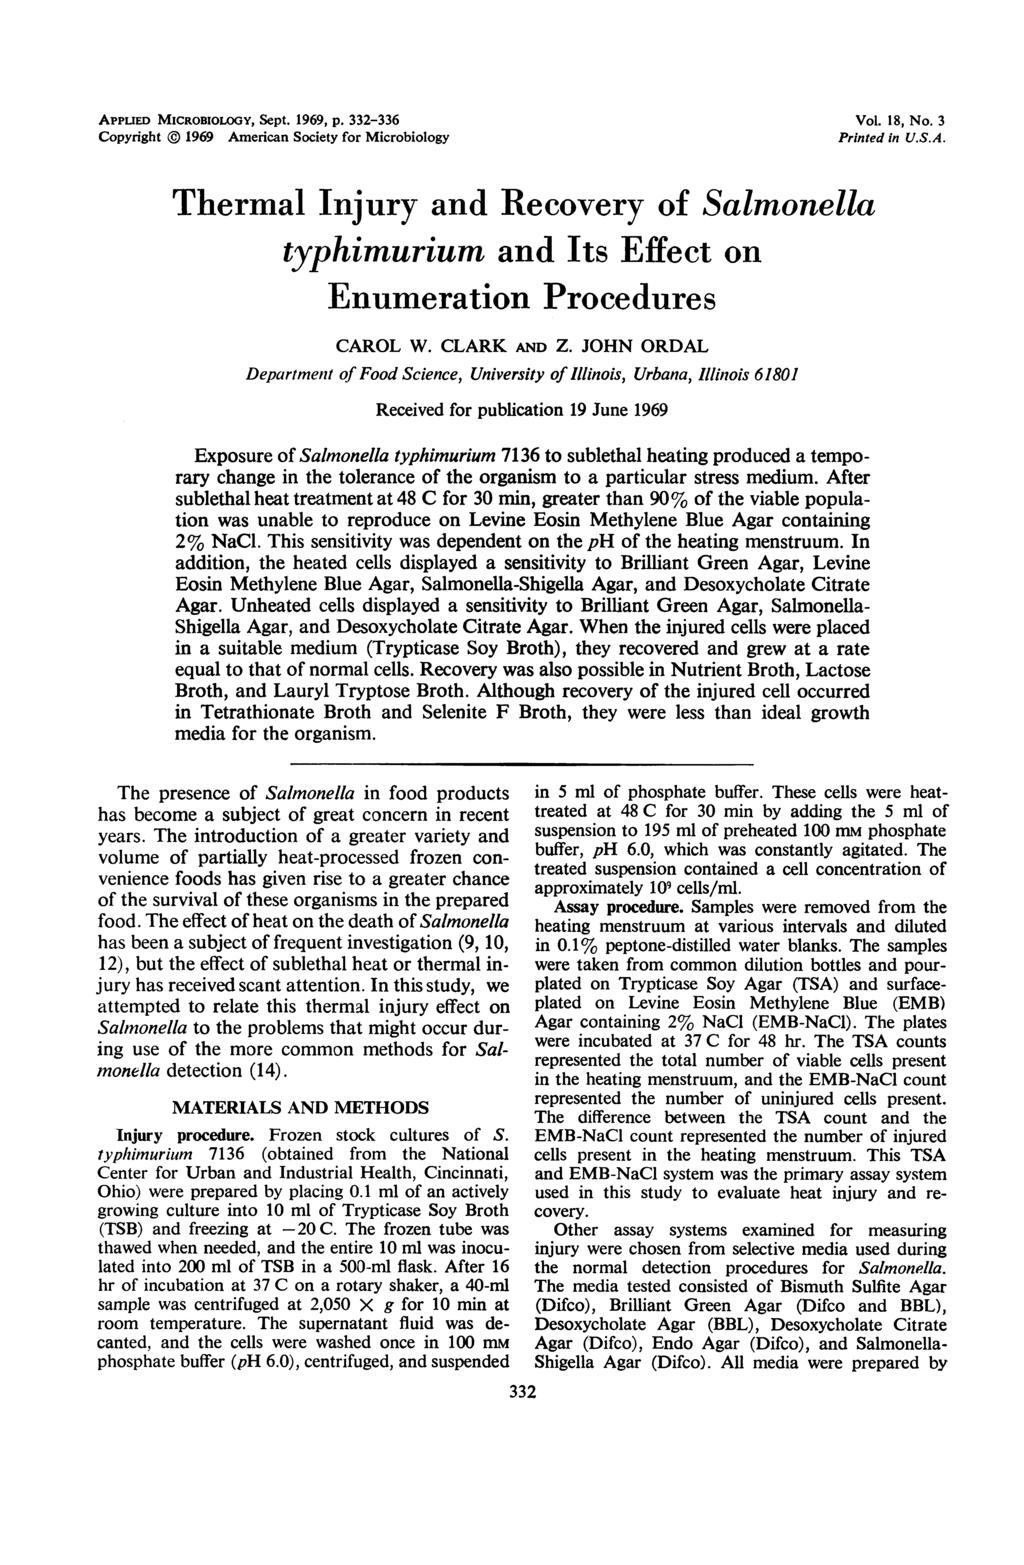 APPLIED MICROBIOLOGY, Sept. 1969, p. 332-336 Copyright @ 1969 American Society for Microbiology Vol. 18, No. 3 Printed in U.S.A. Thermal Injury and Recovery of Salmonella typhimurium and Its Effect on Enumeration Procedures CAROL W.